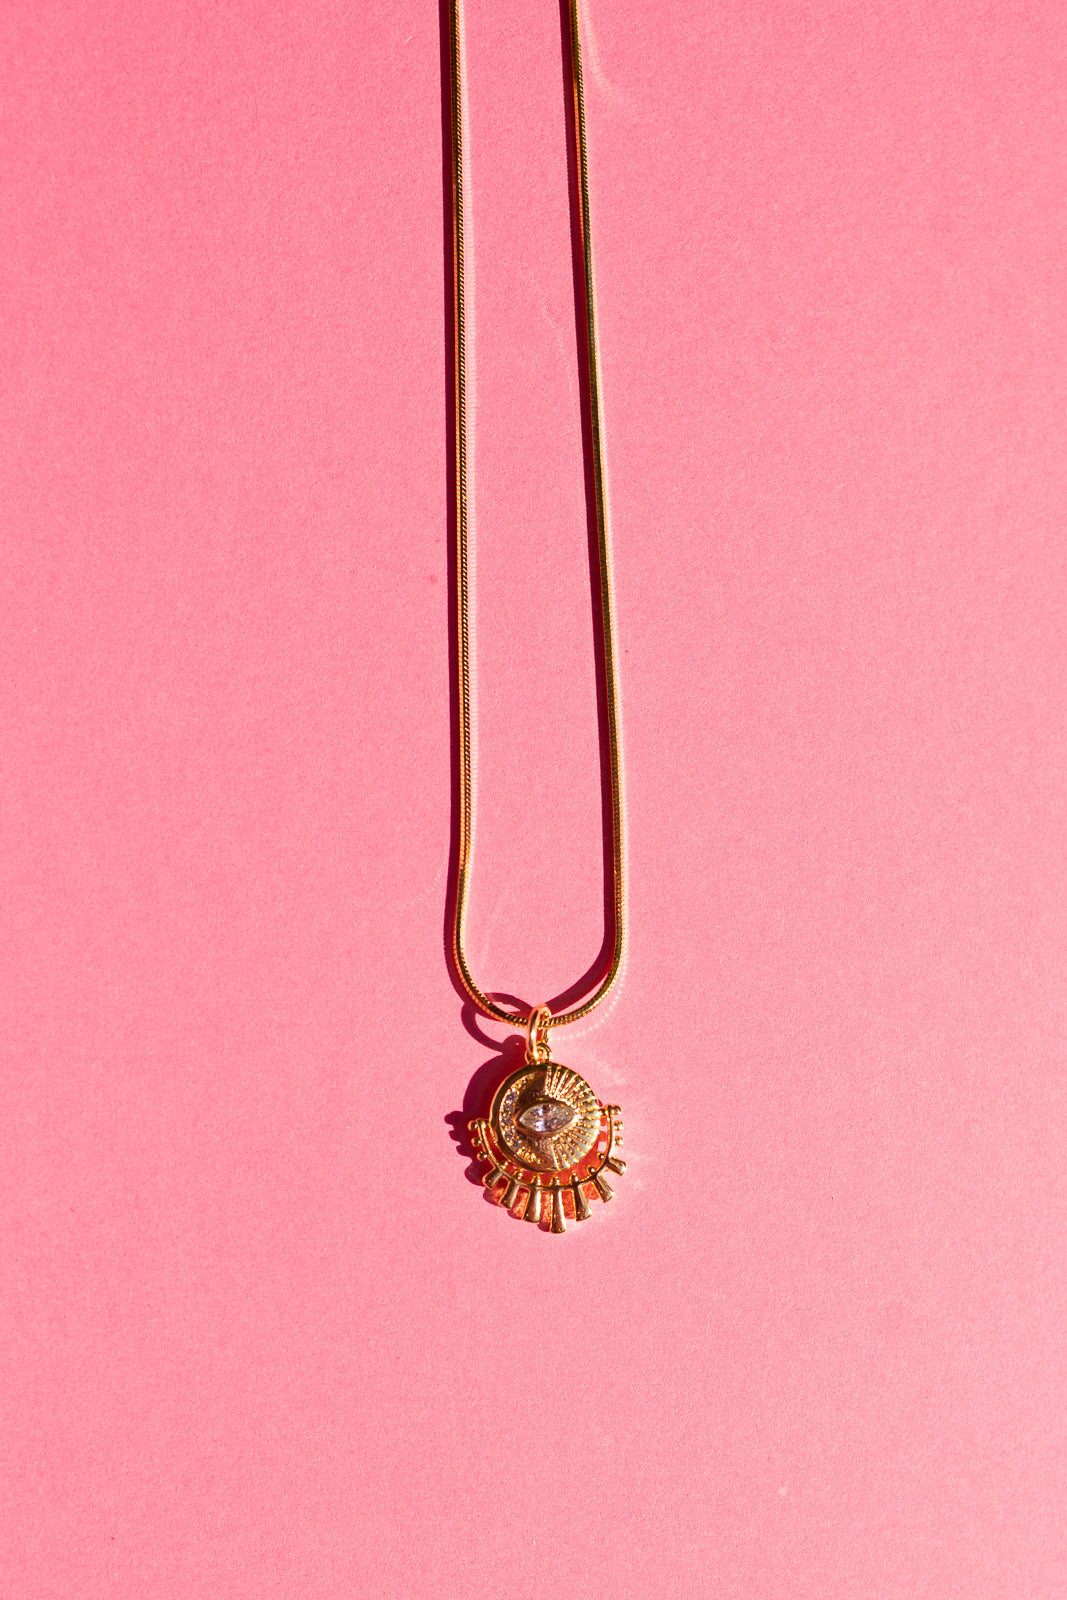 The Third Eye Necklace *GOLD FILLED*